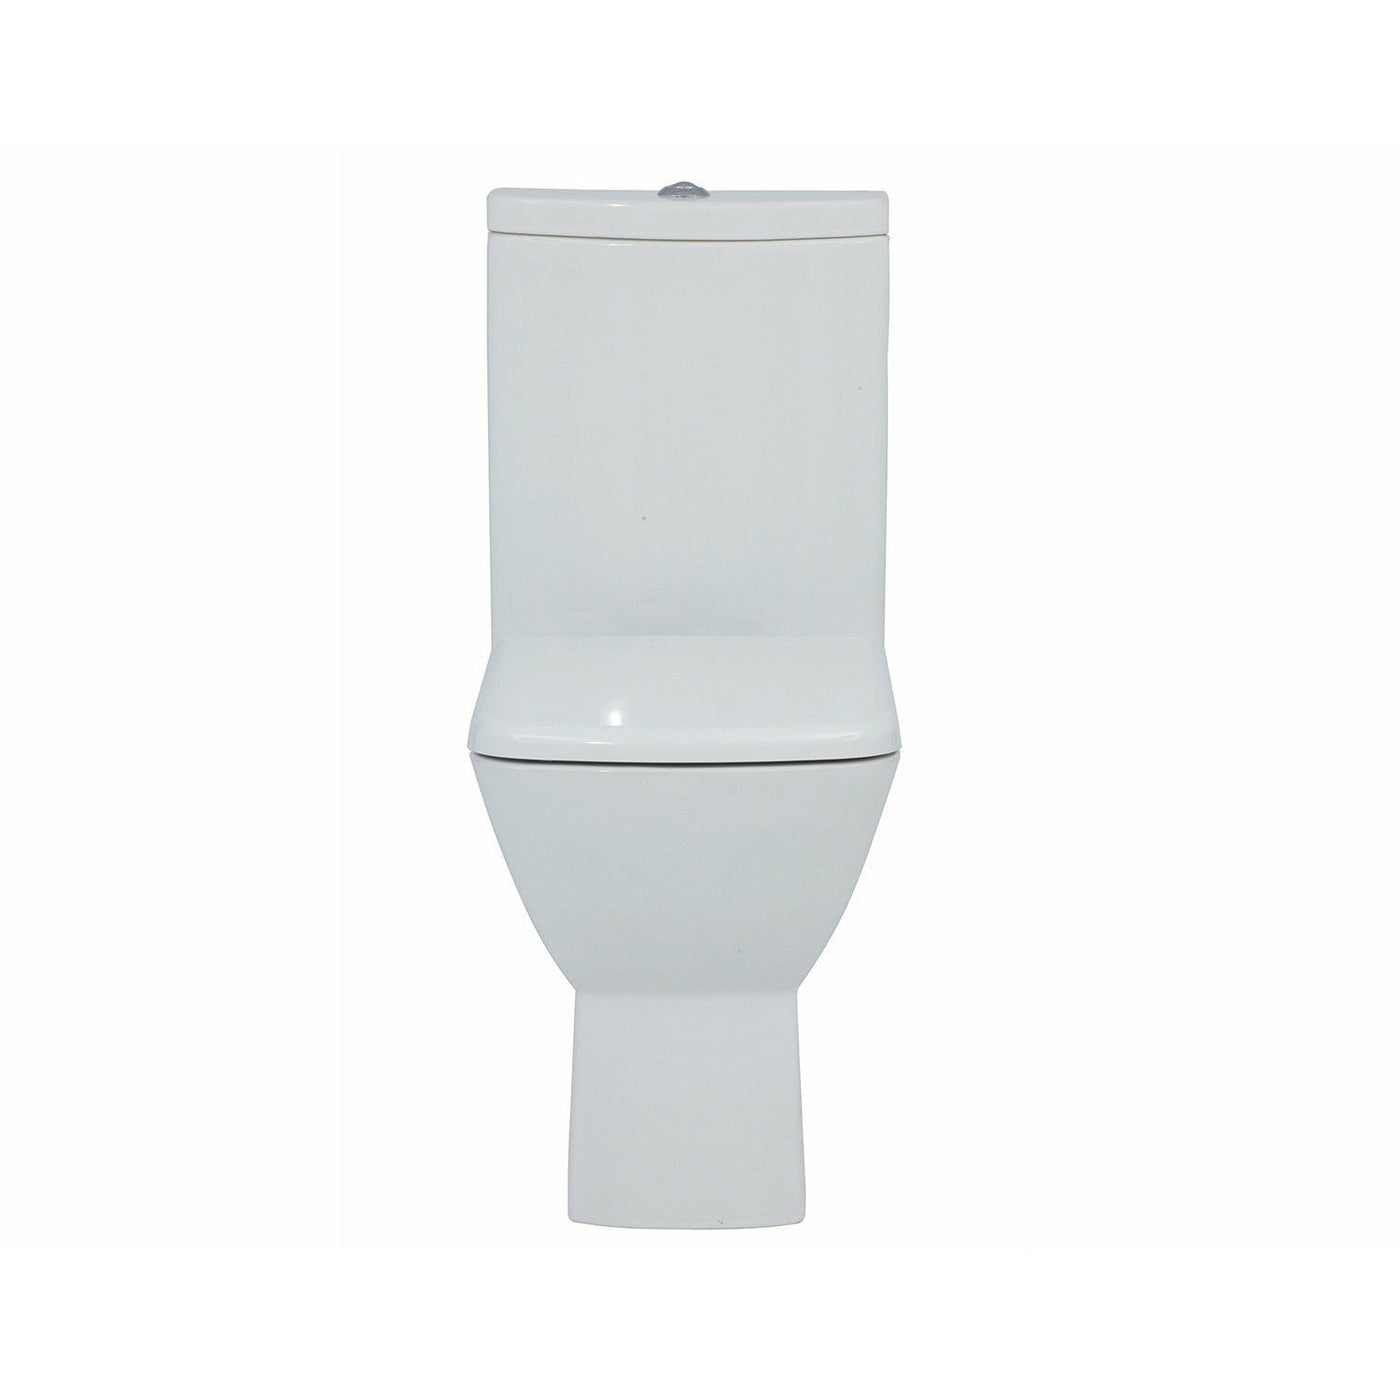 Frontline Summit Close Coupled Toilet with Soft-Close Seat - Letta London - 